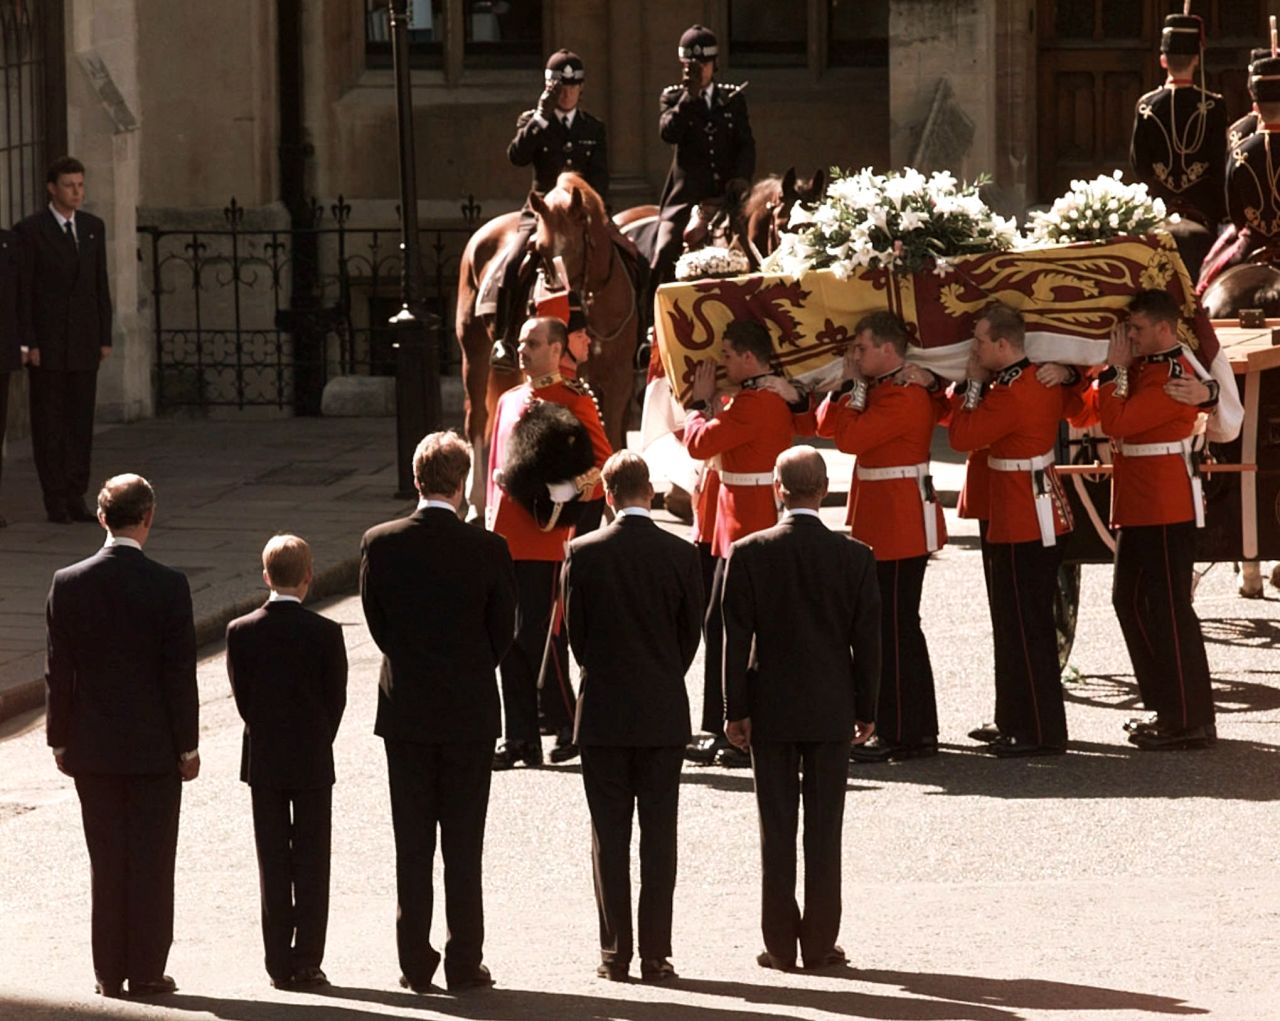 Diana's coffin is carried into London's Westminster Cathedral in September 1997. Watching at the bottom, from left, is Prince Charles, Prince Harry, Charles Spencer, Prince William and Prince Philip.